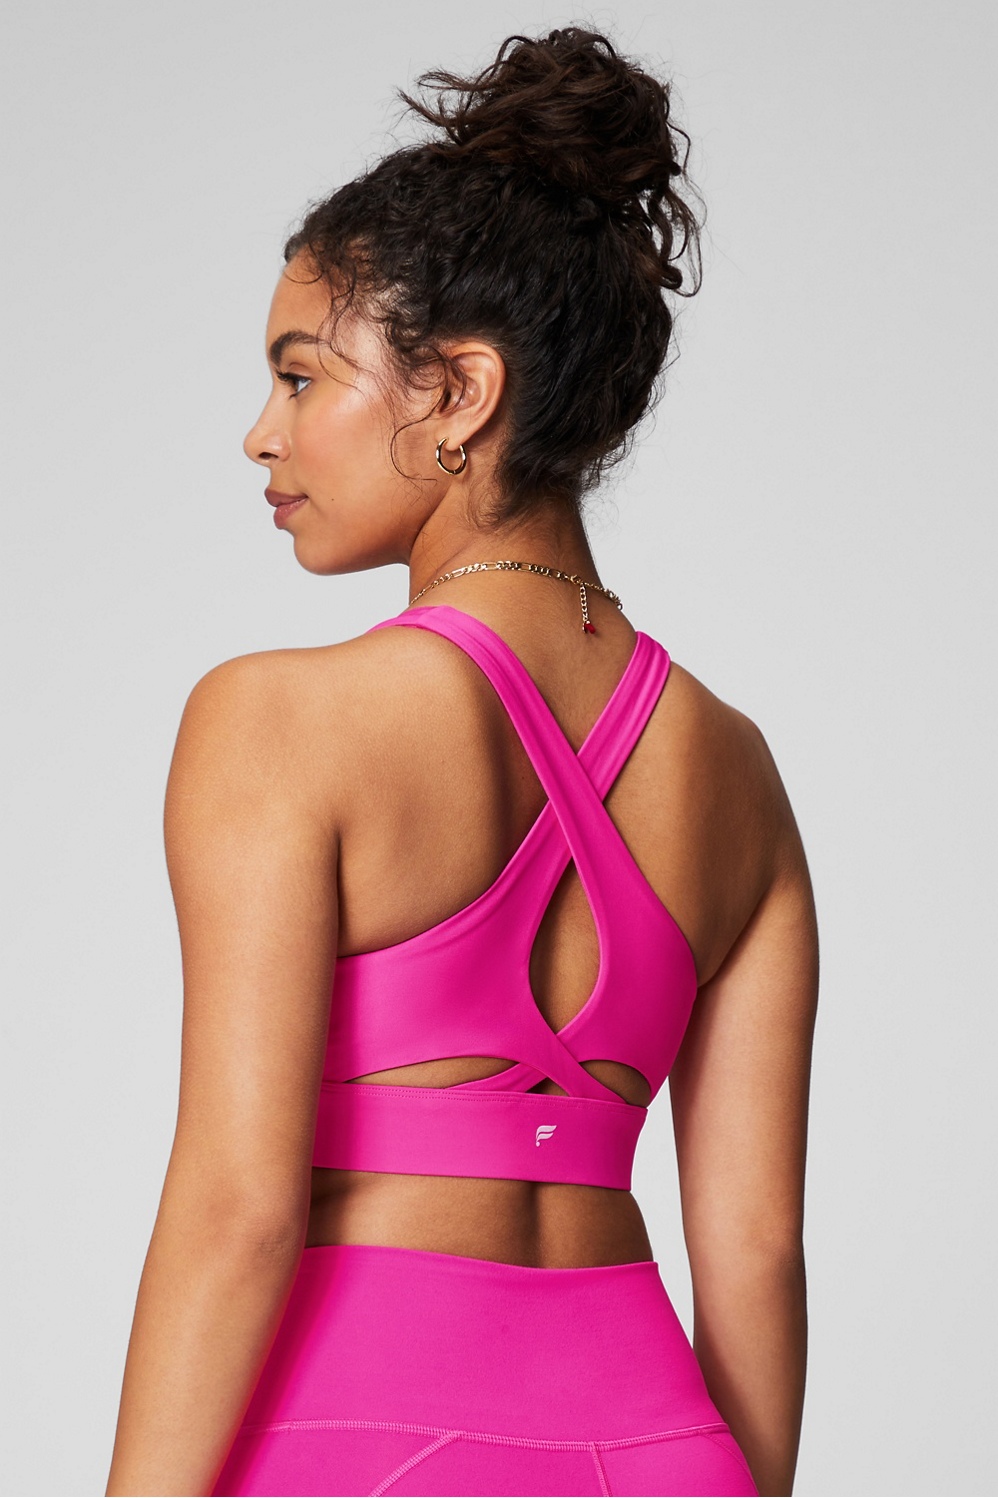 7 Signs You're Wearing The Wrong Sports Bra - ParfaitLingerie.com - Blog